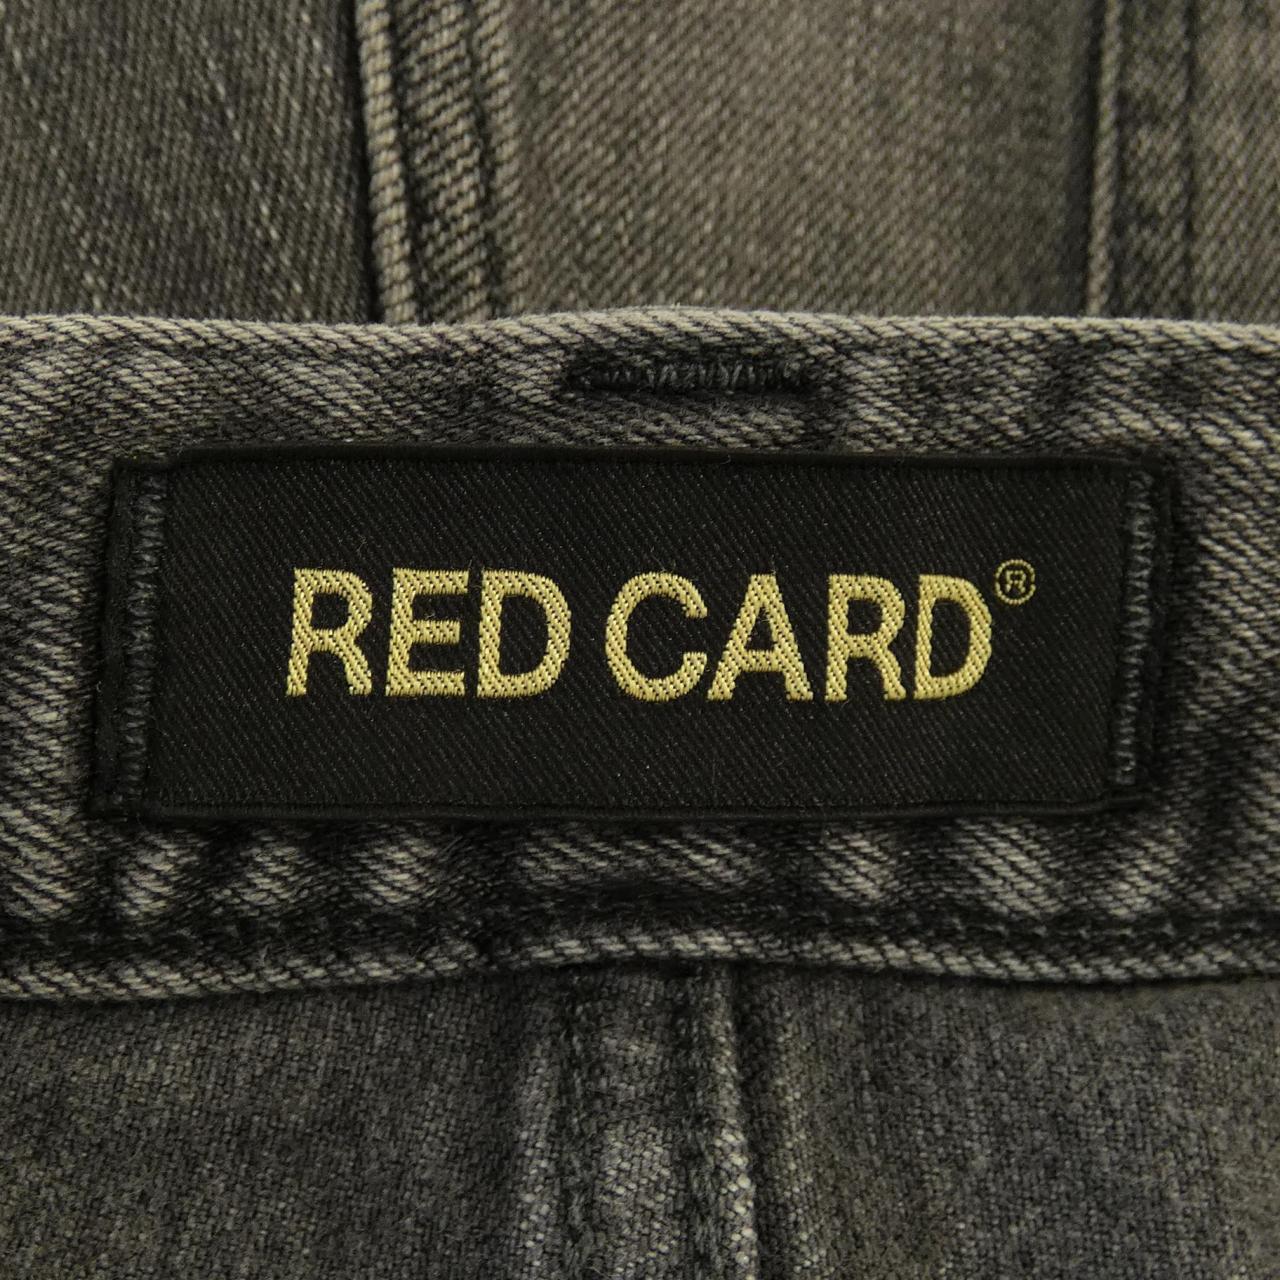 RED CARD jeans